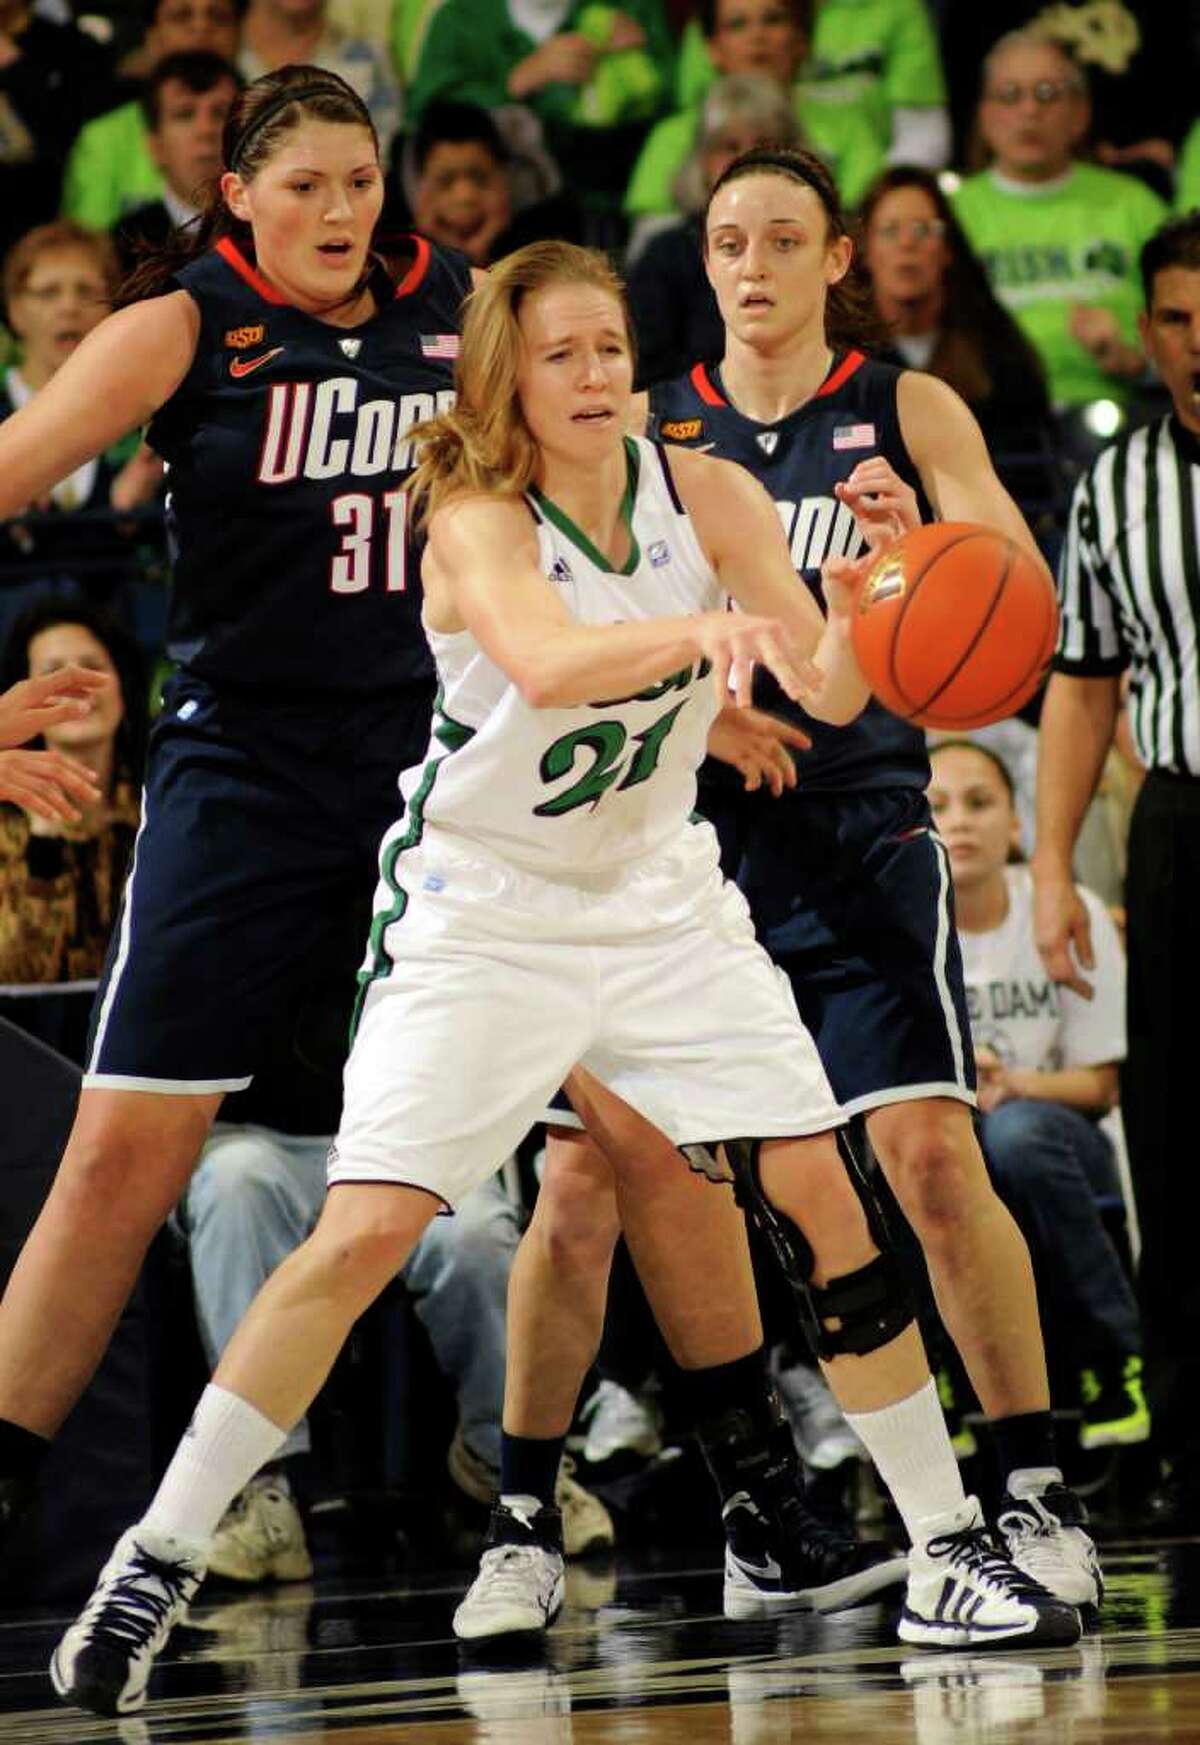 Notre Dame guard Natalie Novosel, center, pass the ball as Connecitcut center Stefanie Dolson, left, and Kelly Faris defend during the first half of an NCAA college basketball game, Saturday, Jan. 7, 2012, in South Bend, Ind. (AP Photo/Joe Raymond)